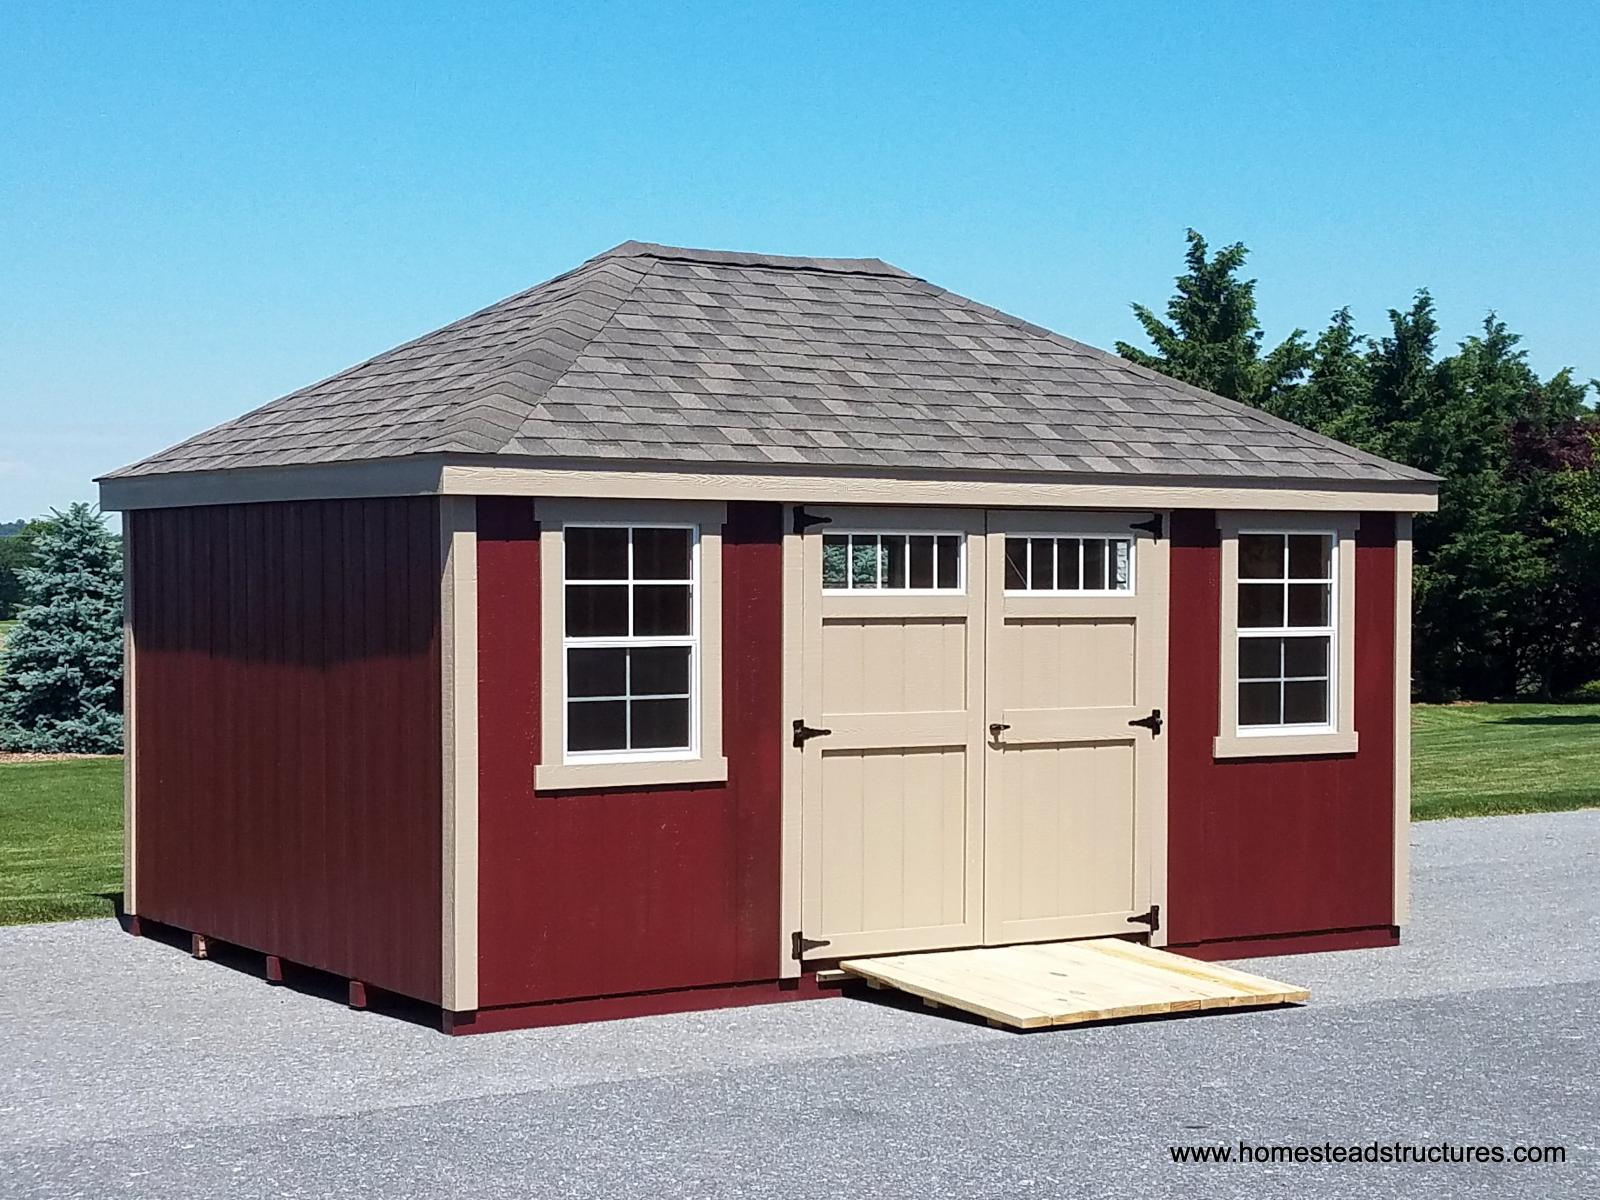 free quote on sheds and garages get your custom shed prices